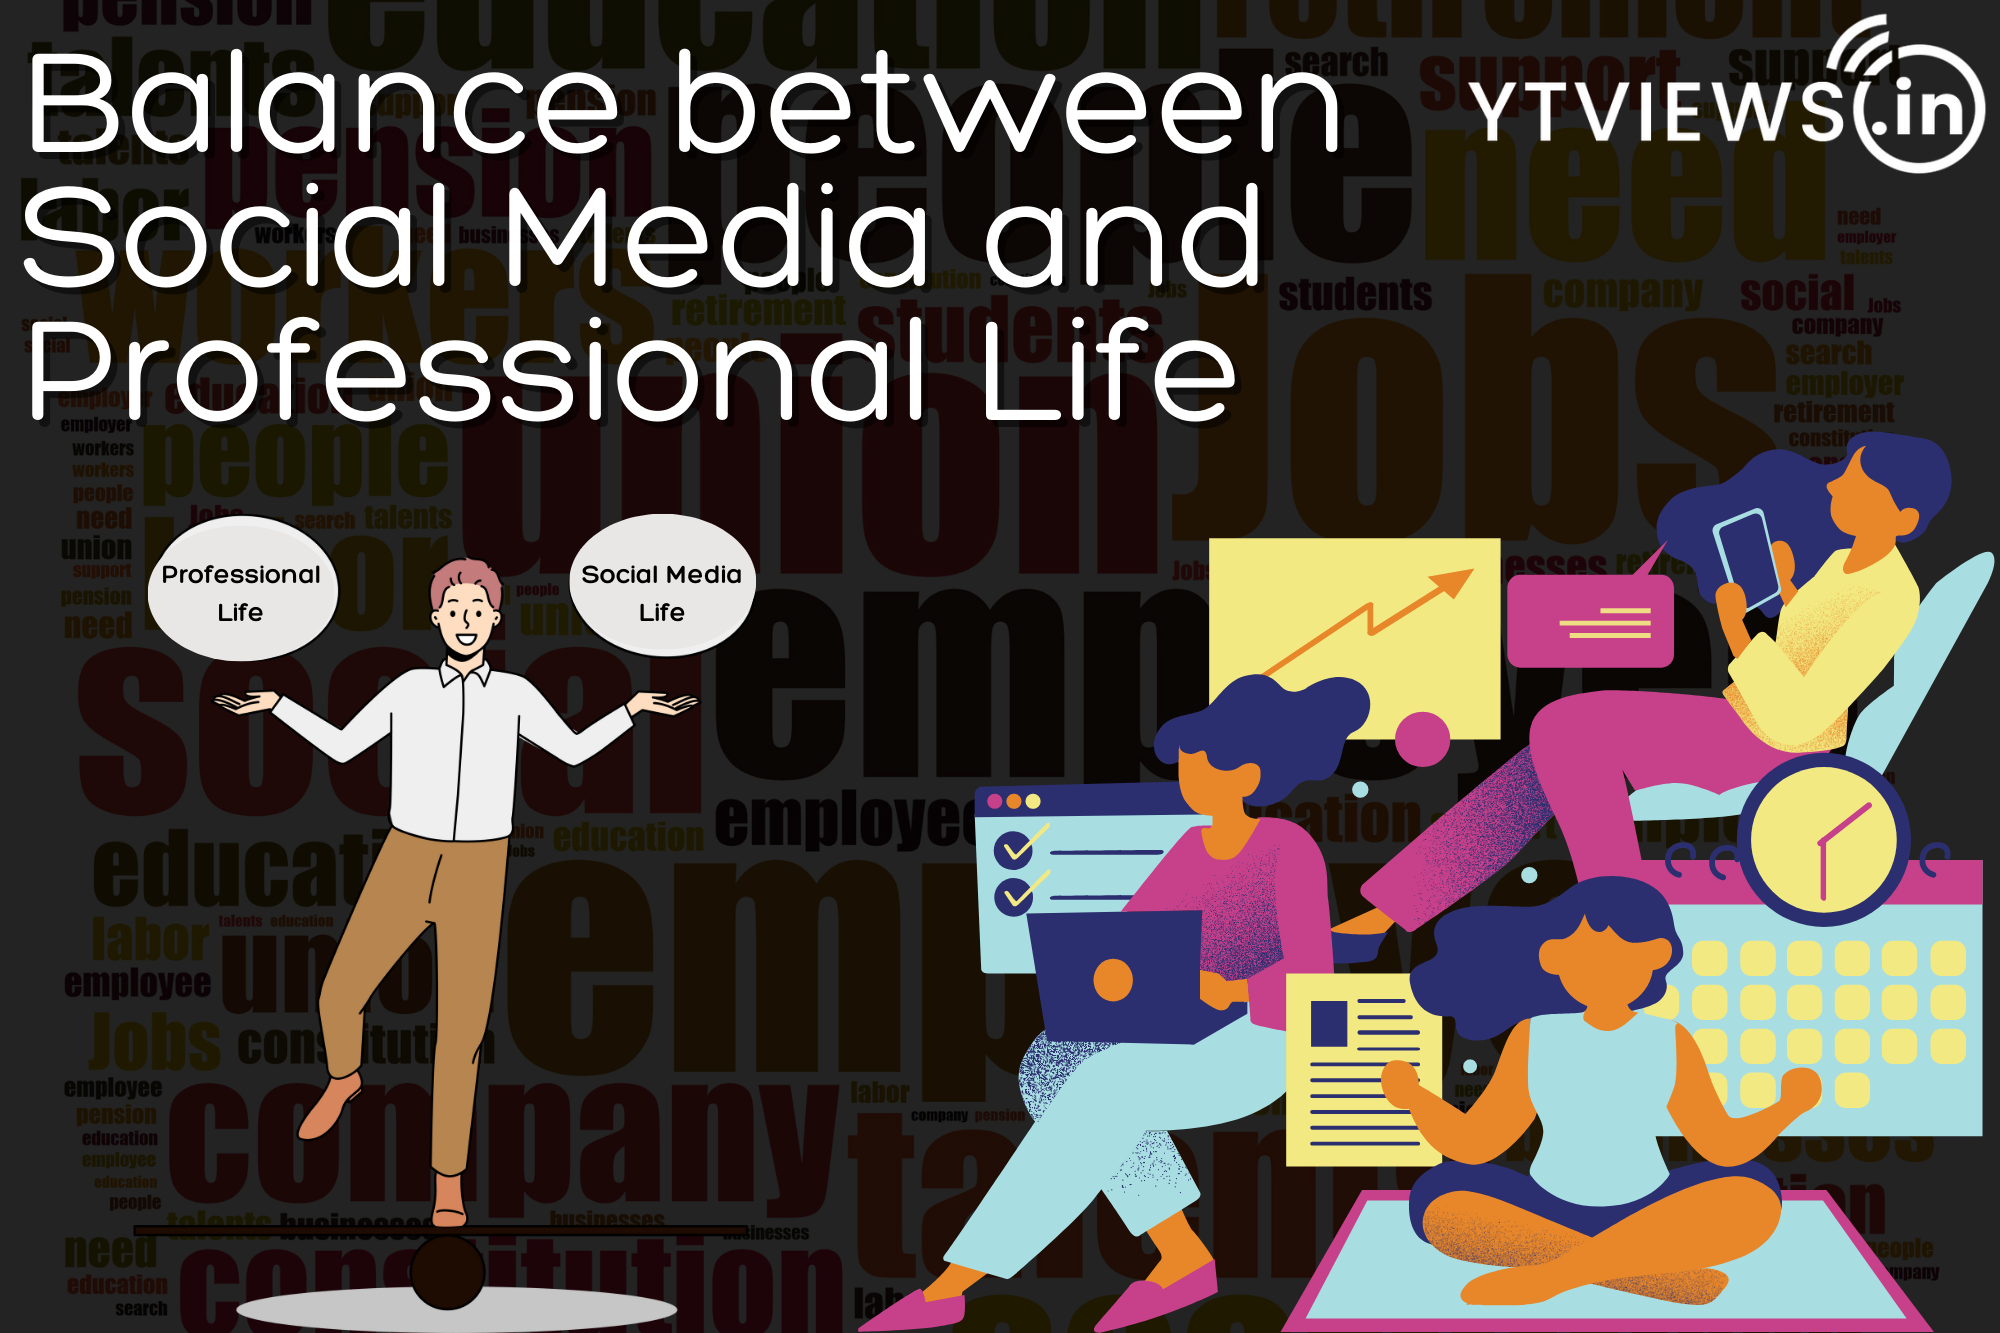 How can you work towards creating a balance between social media and professional life